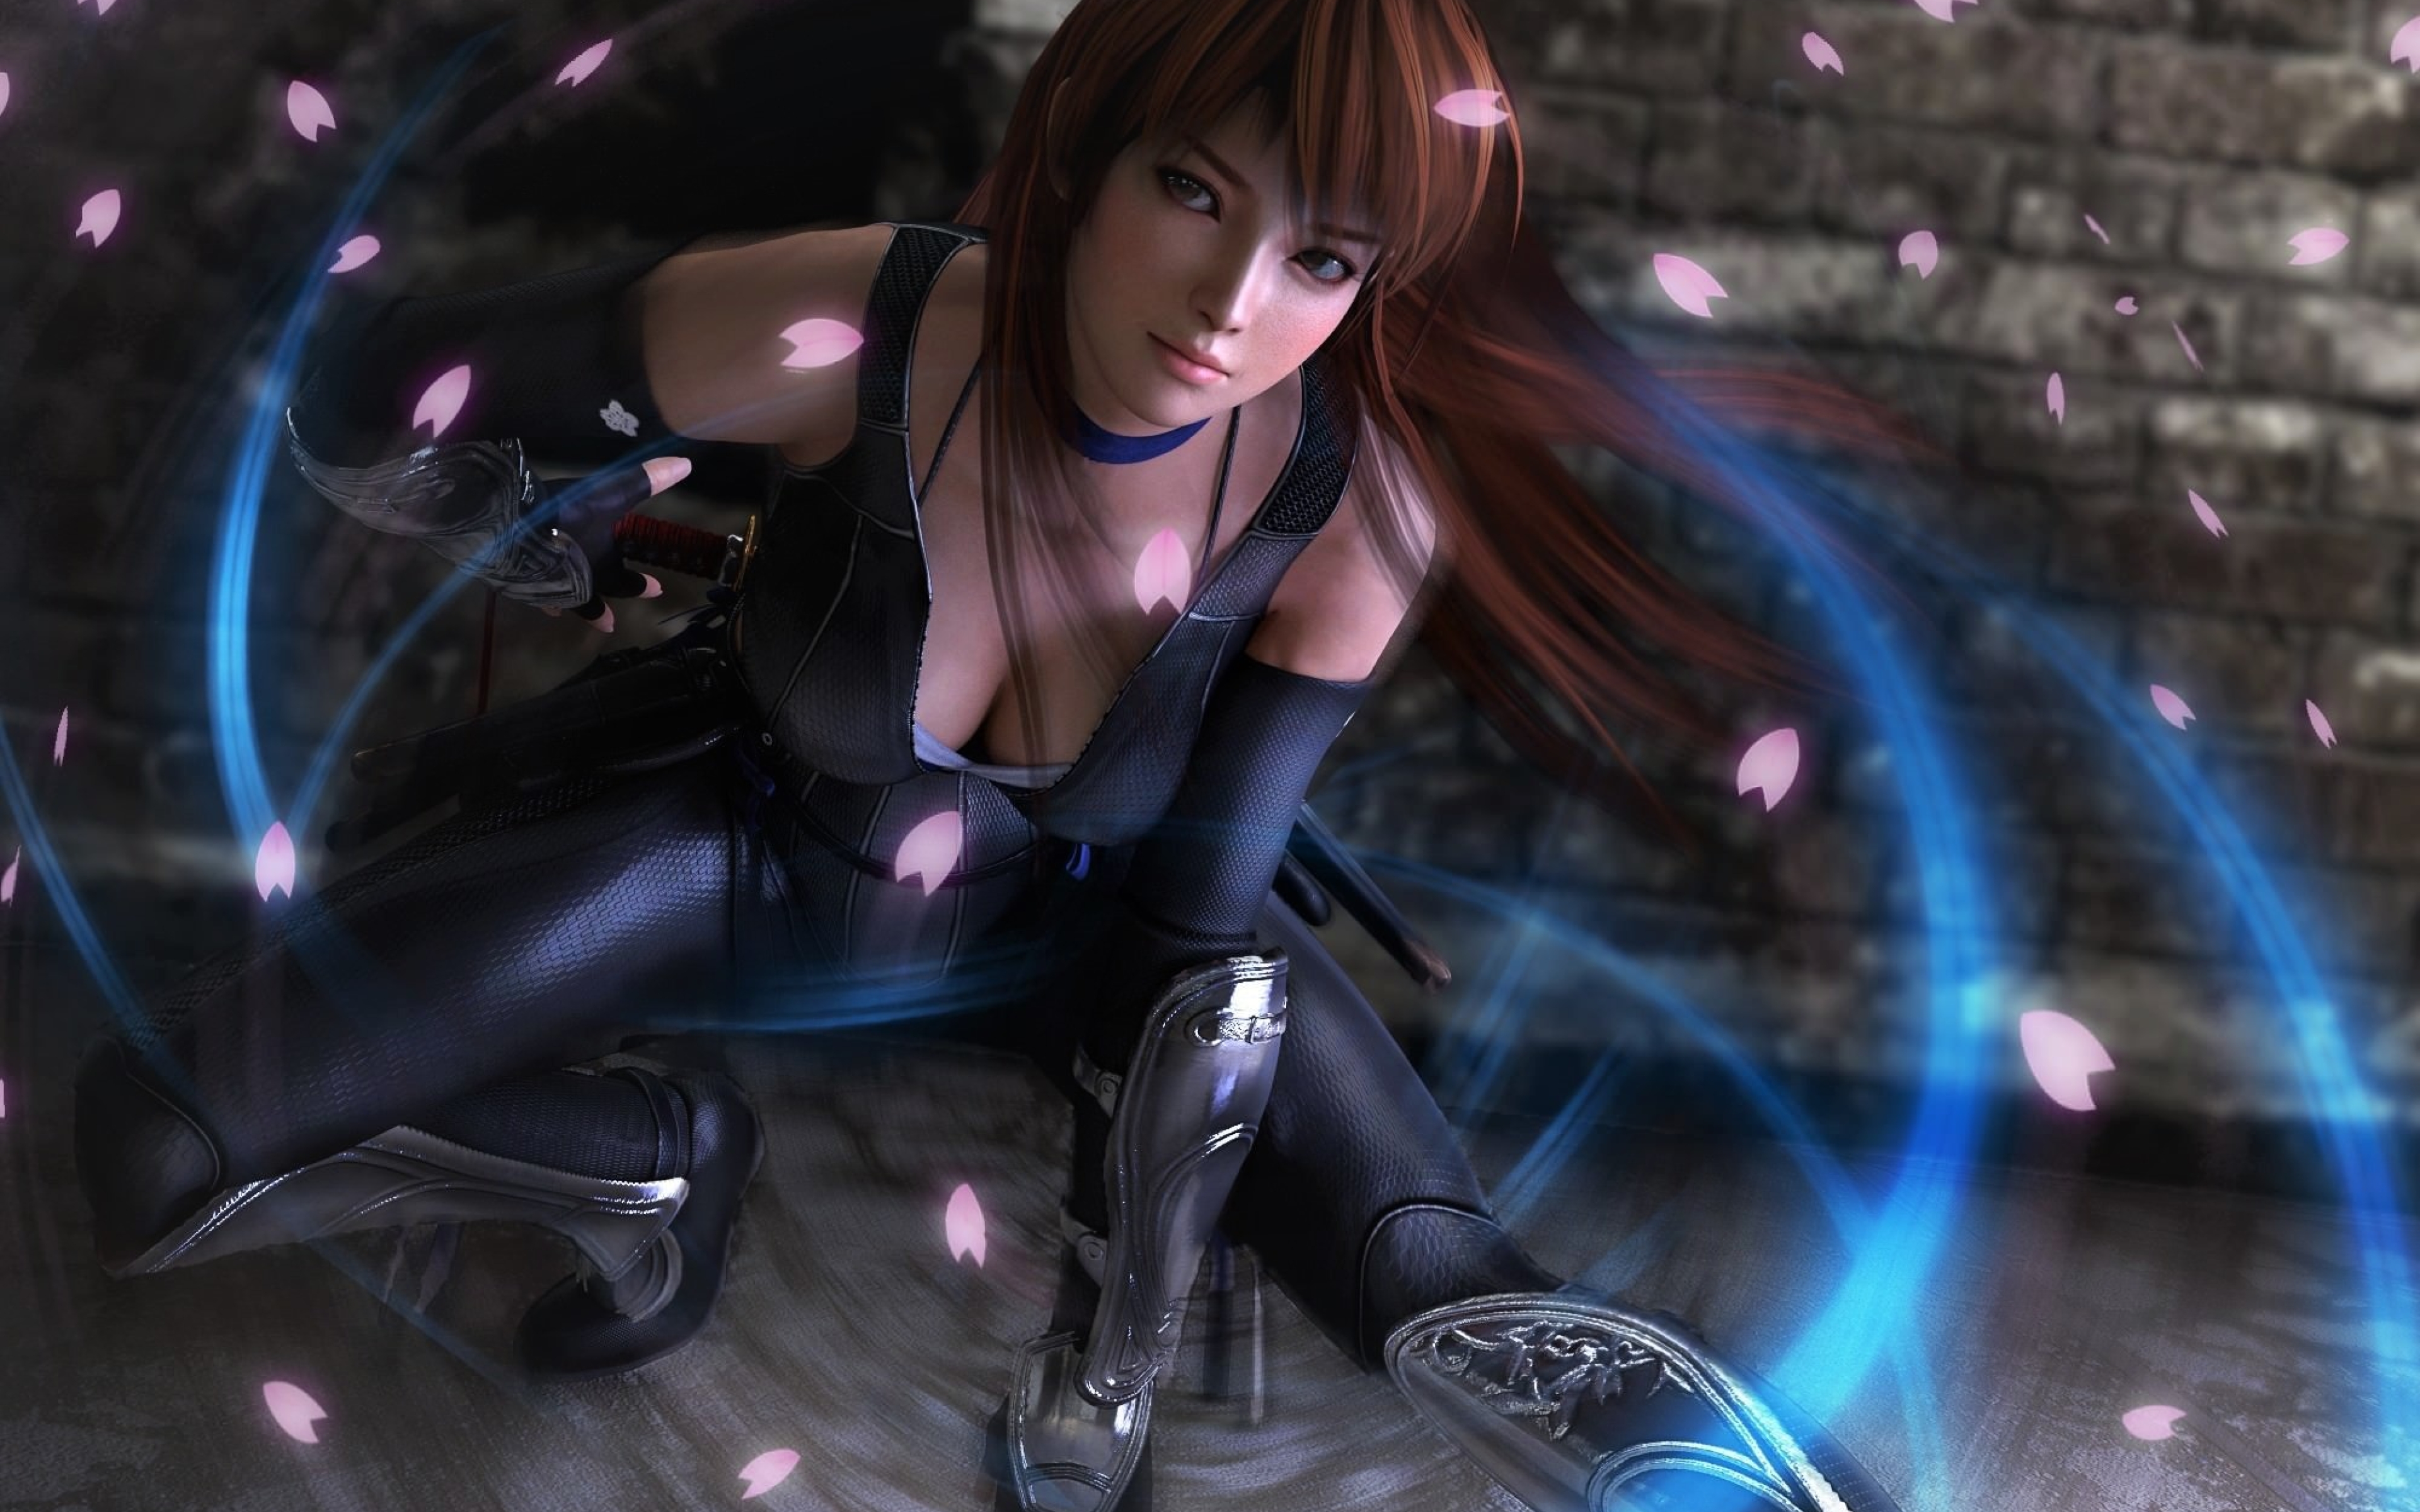 3д фулл. Касуми Dead or Alive 5. Dead or Alive 4 Касуми. Kasumi из Dead or Alive. Dead or Alive-Doa Kasumi.